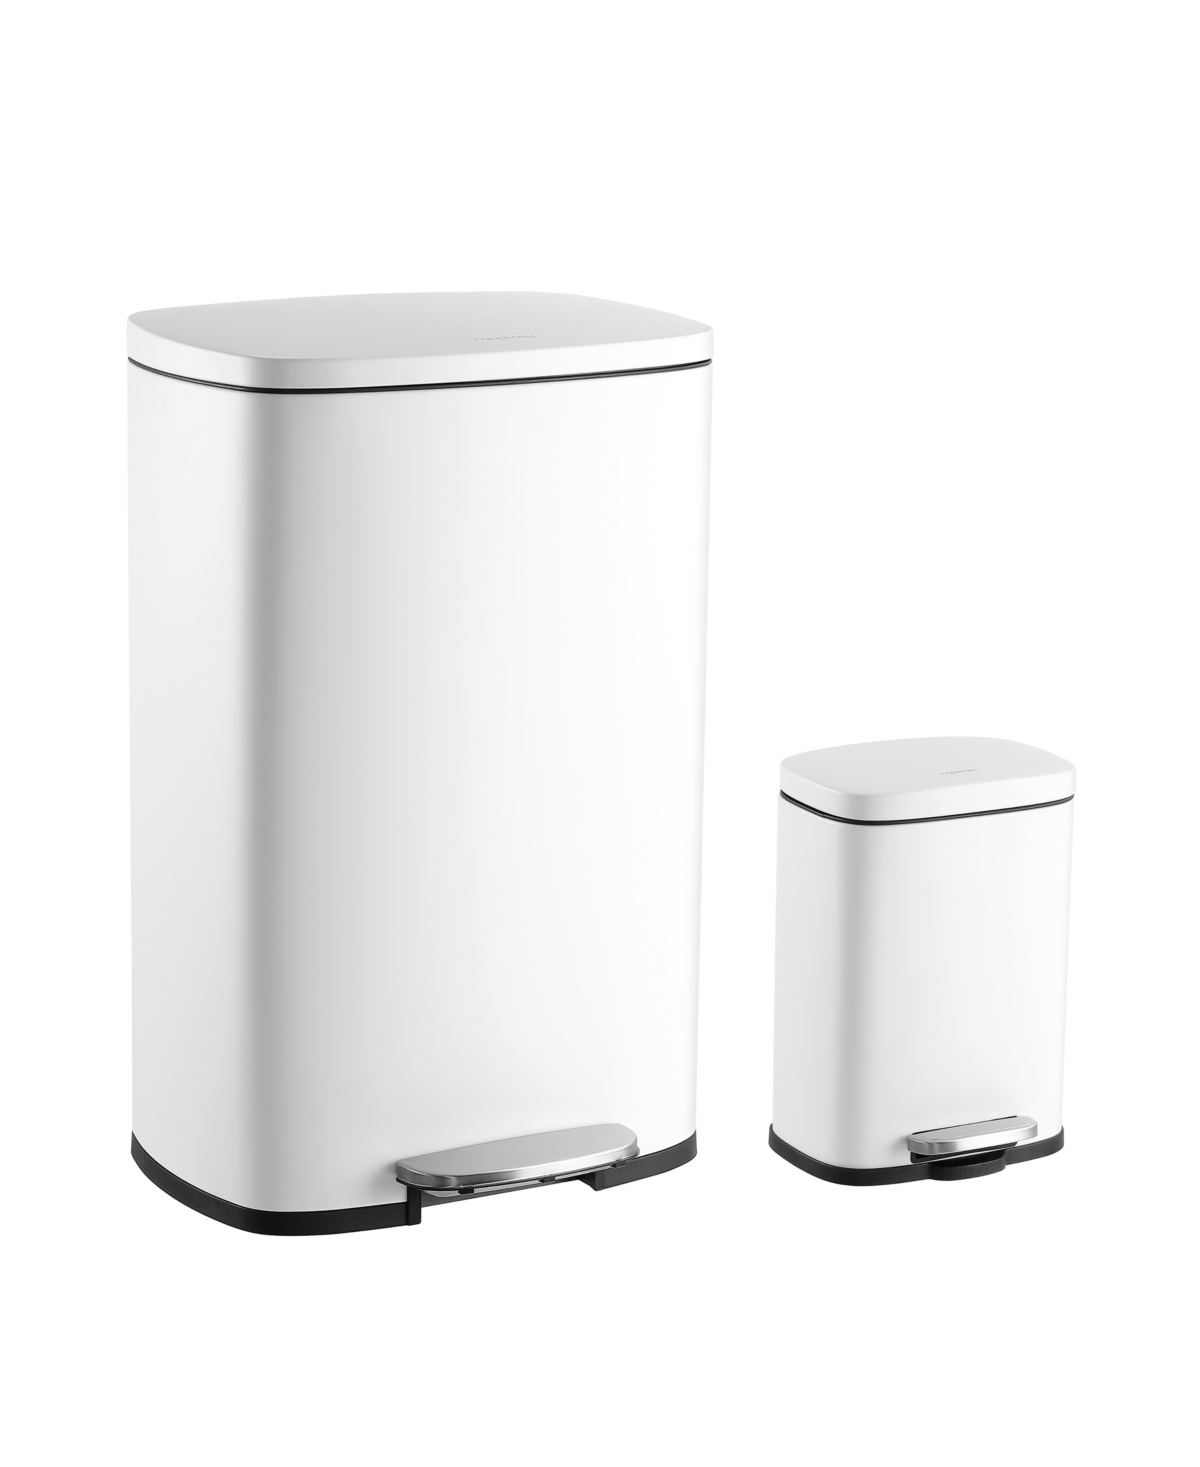 Connor Rectangular Trash Can with Soft-Close Lid and Free Mini Trash Can, Set of 2 - White